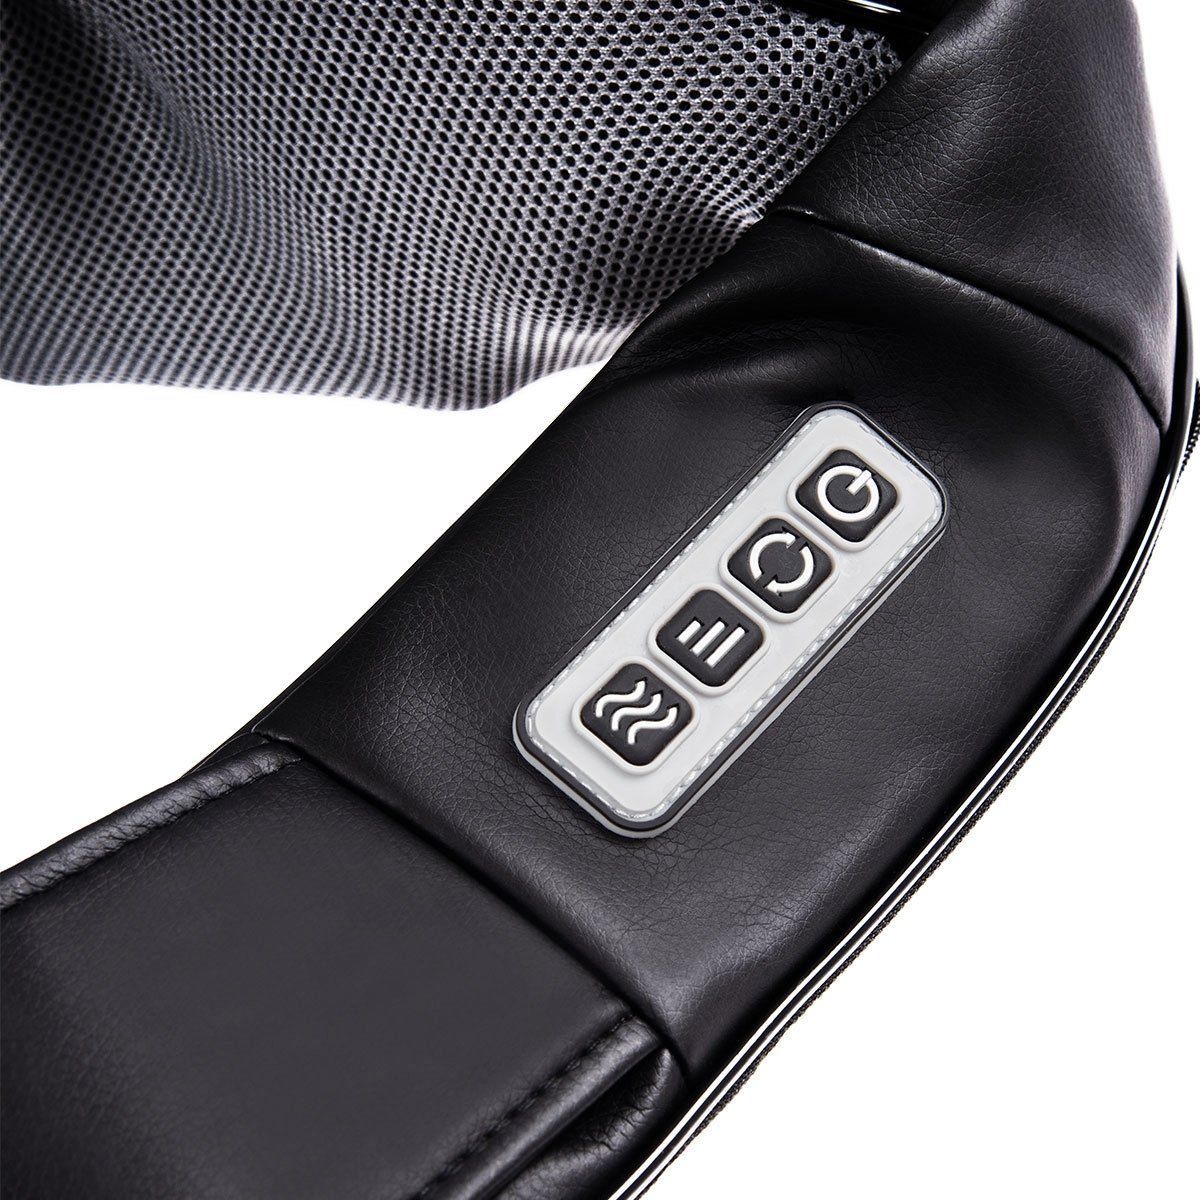 Electric Back and Neck Kneading Shoulder Massager with Heat Straps, Black at Gallery Canada